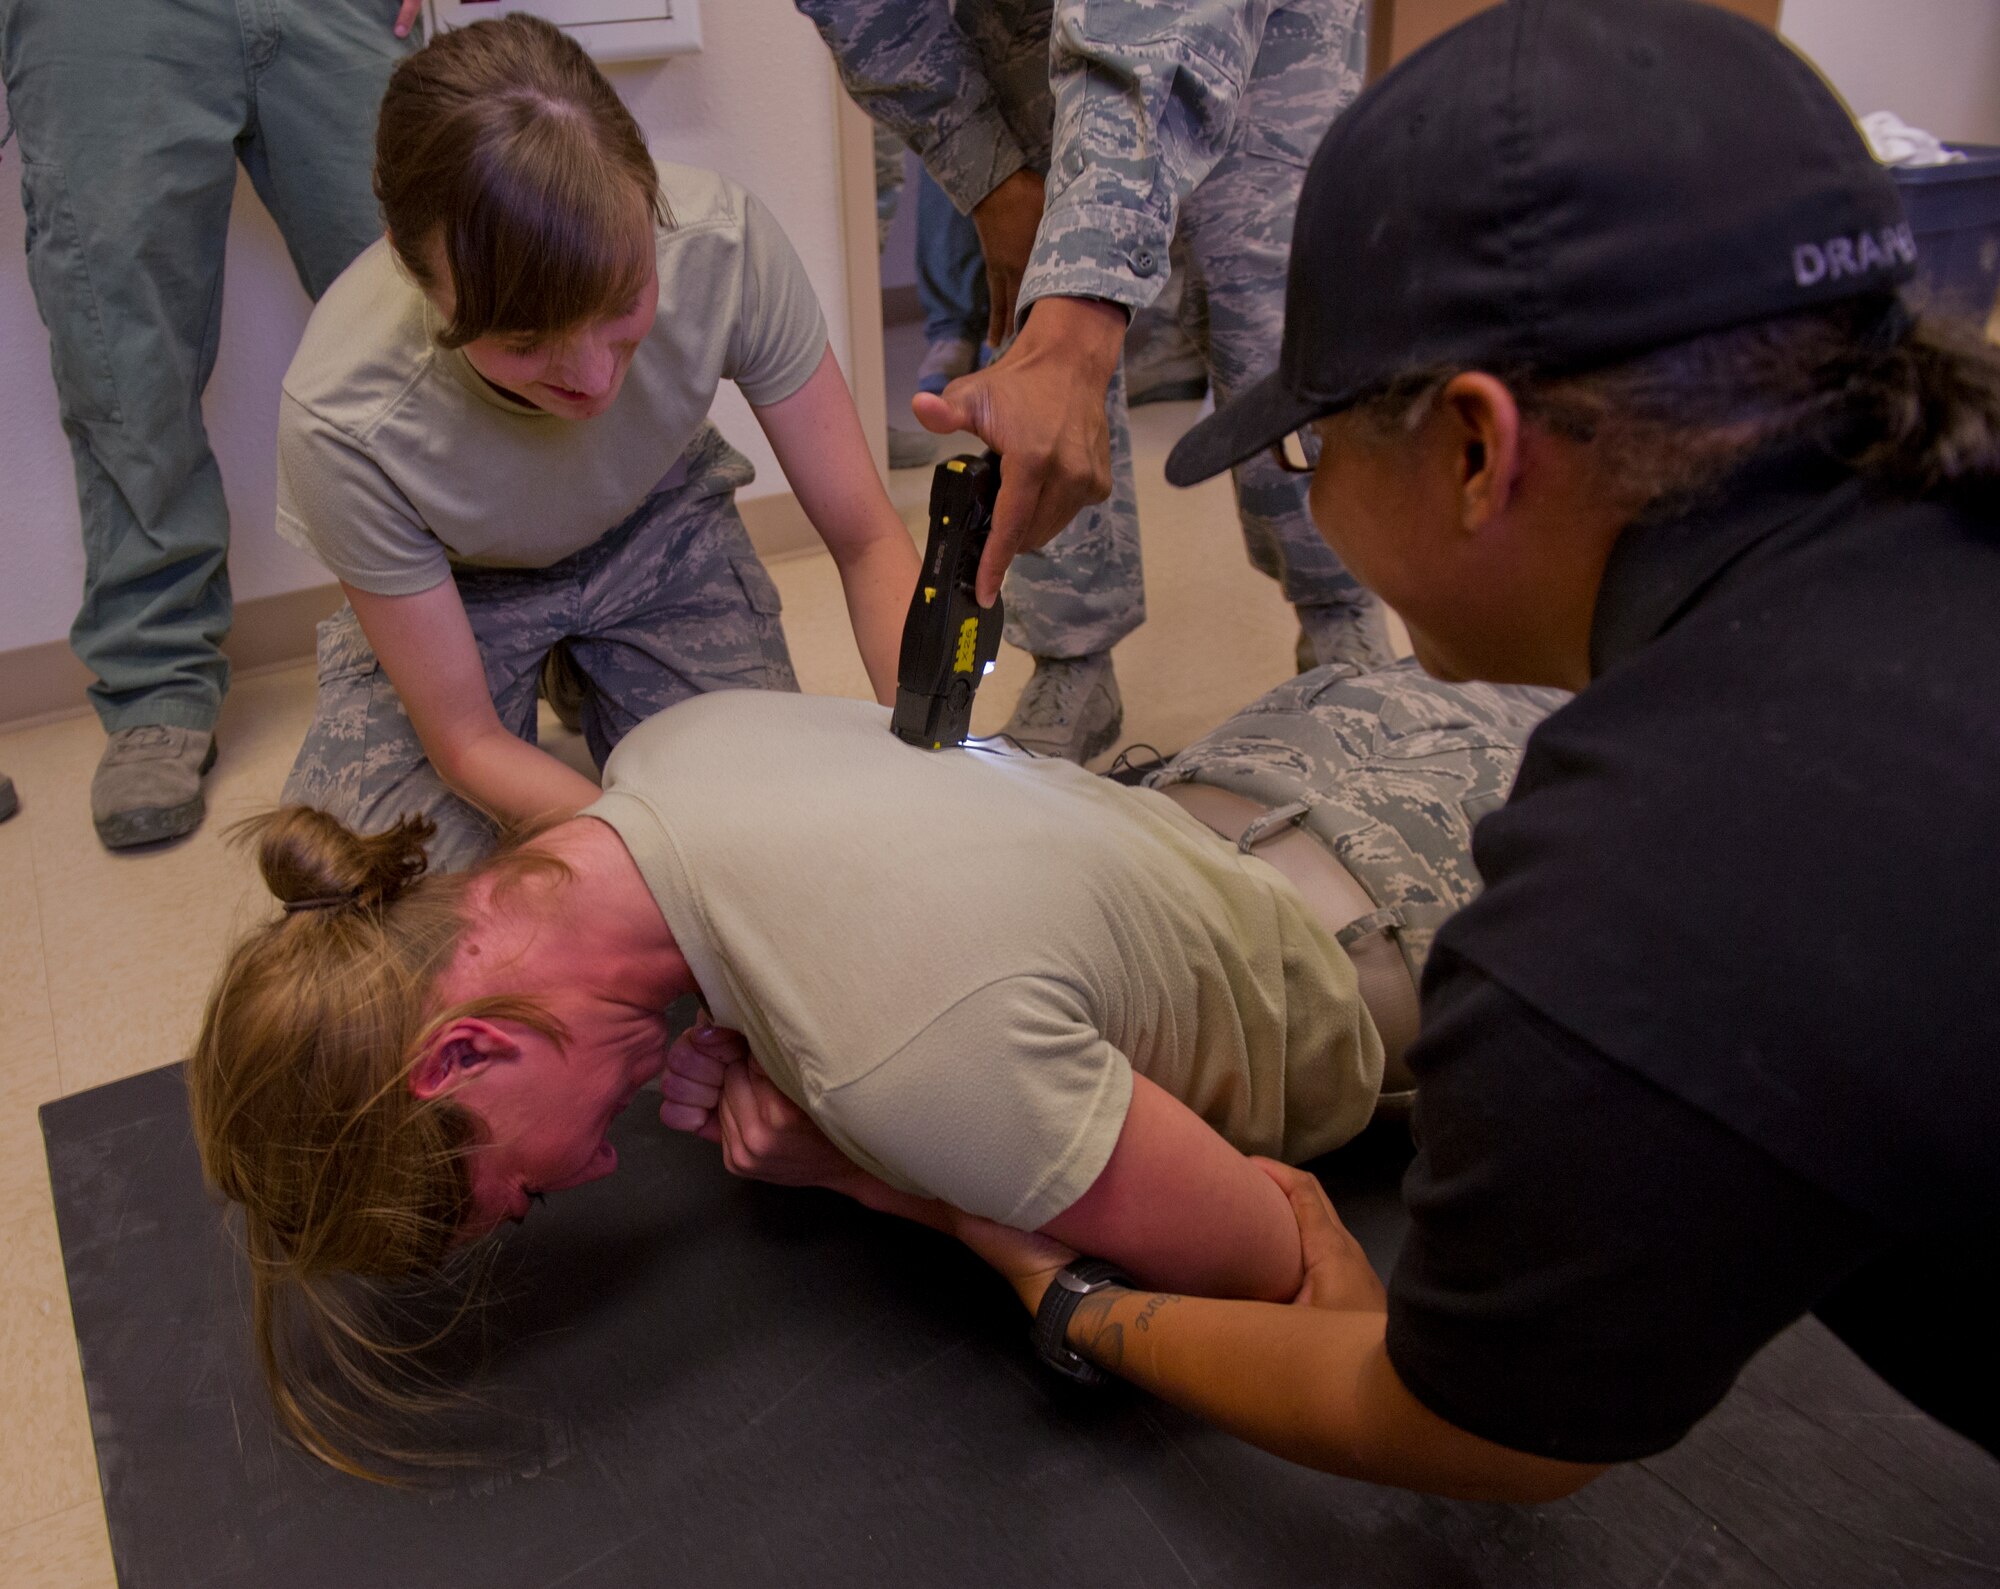 Britney Petrina, U.S. Air Force Academy cadet, receives a five second burst from a stun gun at the 49th Security Forces Squadron at Holloman Air Force Base, N.M., June 28. The 49th SFS gave the Cadets insight into their training requirements during the visit. The Air Force Academy Cadets spent two weeks at Holloman to gain insight on their career options after the academy. (U.S. Air Force photo by Airman 1st Class Aaron Montoya/Released)